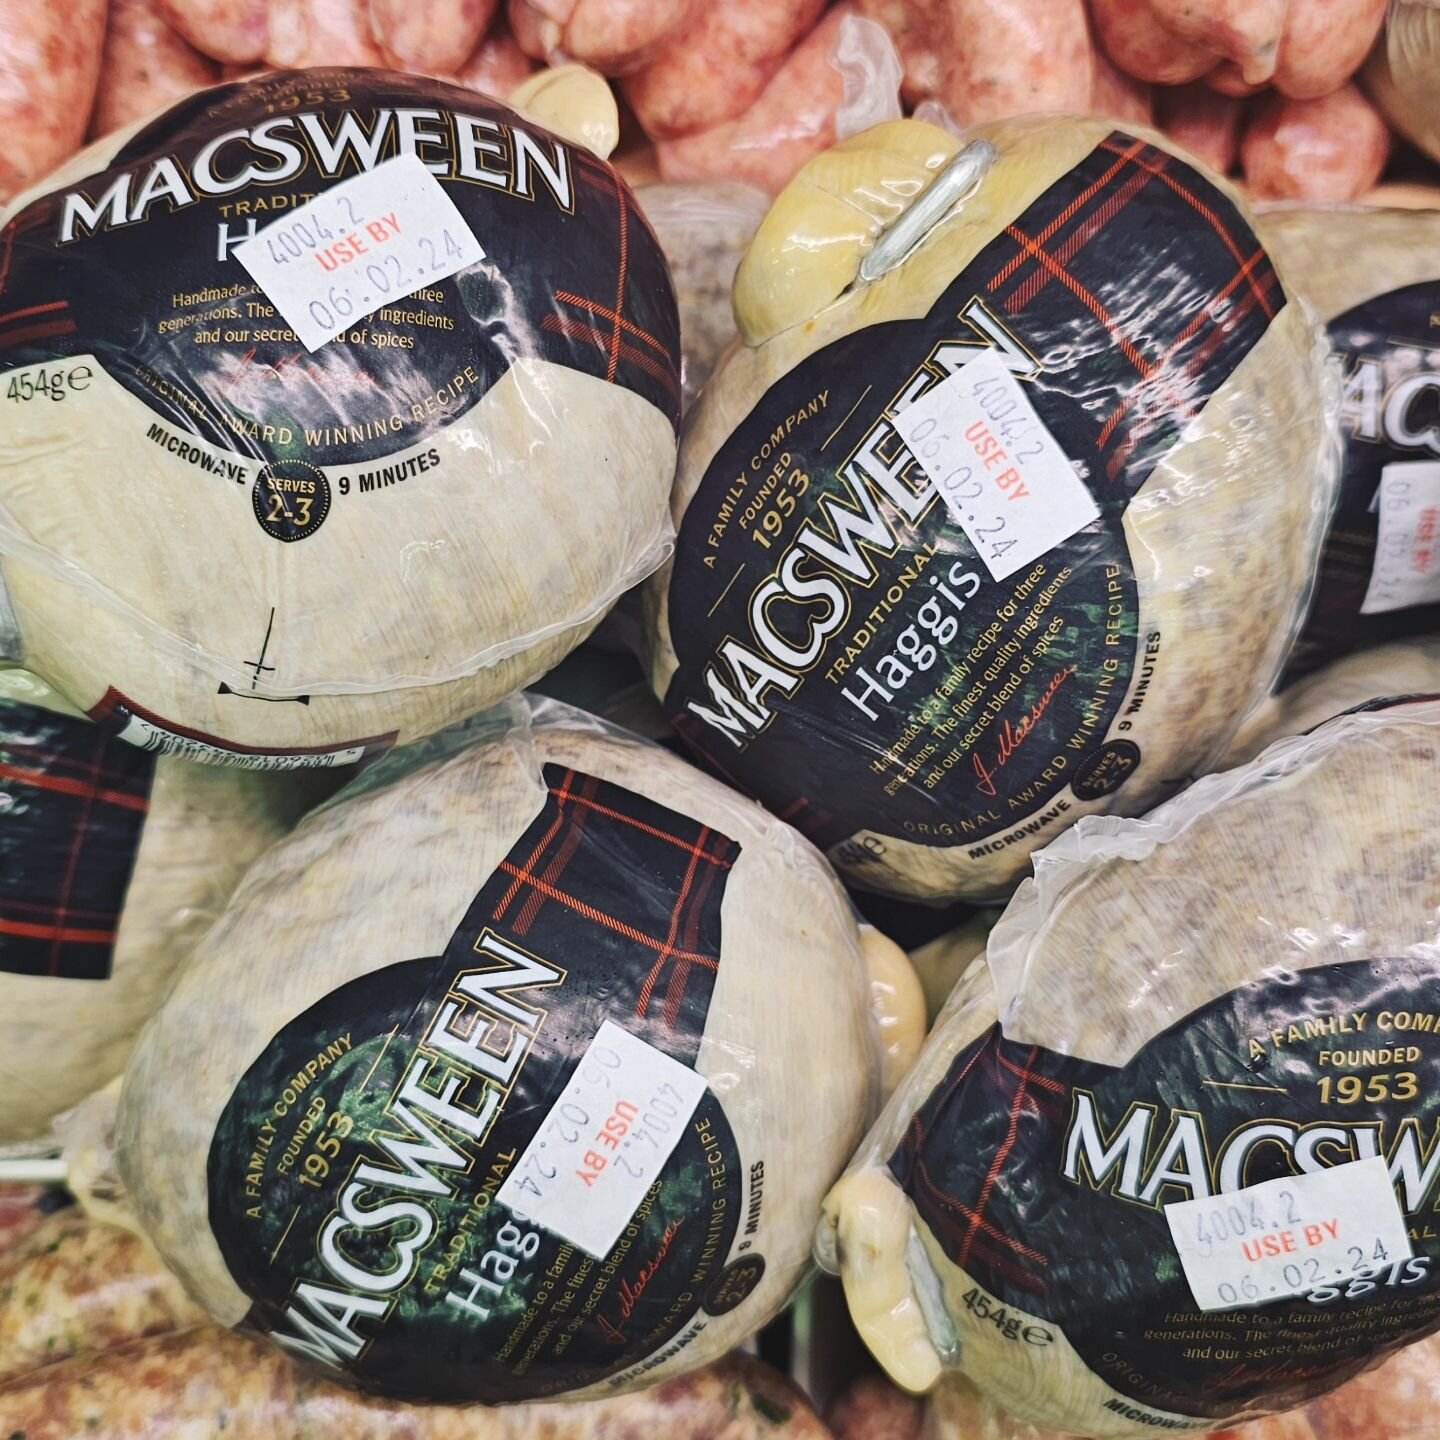 Come celebrate Burns Night with an award winning Macsween haggis. Available in store now!

#sydenham #sydenhammums #dulwichmums #crystalpalacemums #nightin #butchers #freerange #fish #fishmongers #shopindependent #shopsmallbusiness #foodieofinstagram